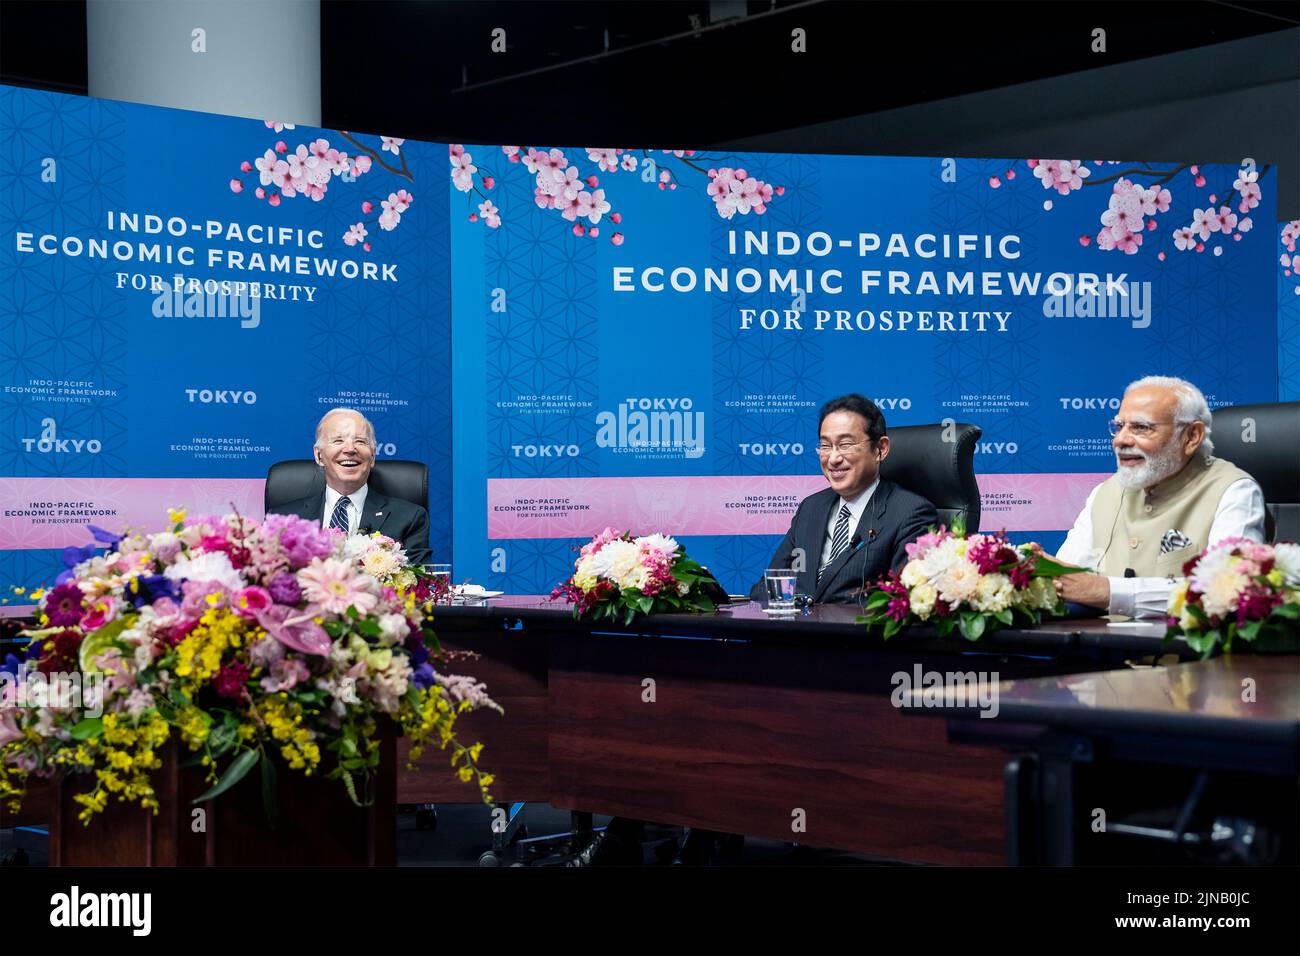 Tokyo, Japan. 23 May, 2022. U.S. President Joe Biden, joined by Japanese Prime Minister Fumio Kishida, center, and Indian Prime Minister Narendra Modi, right, delivers remarks at a launch event for the Indo-Pacific Economic Framework for Prosperity, at the Izumi Garden Gallery, May 23, 2022, in Tokyo, Japan. Credit: Adam Schultz/U.S. State Department/Alamy Live News Stock Photo